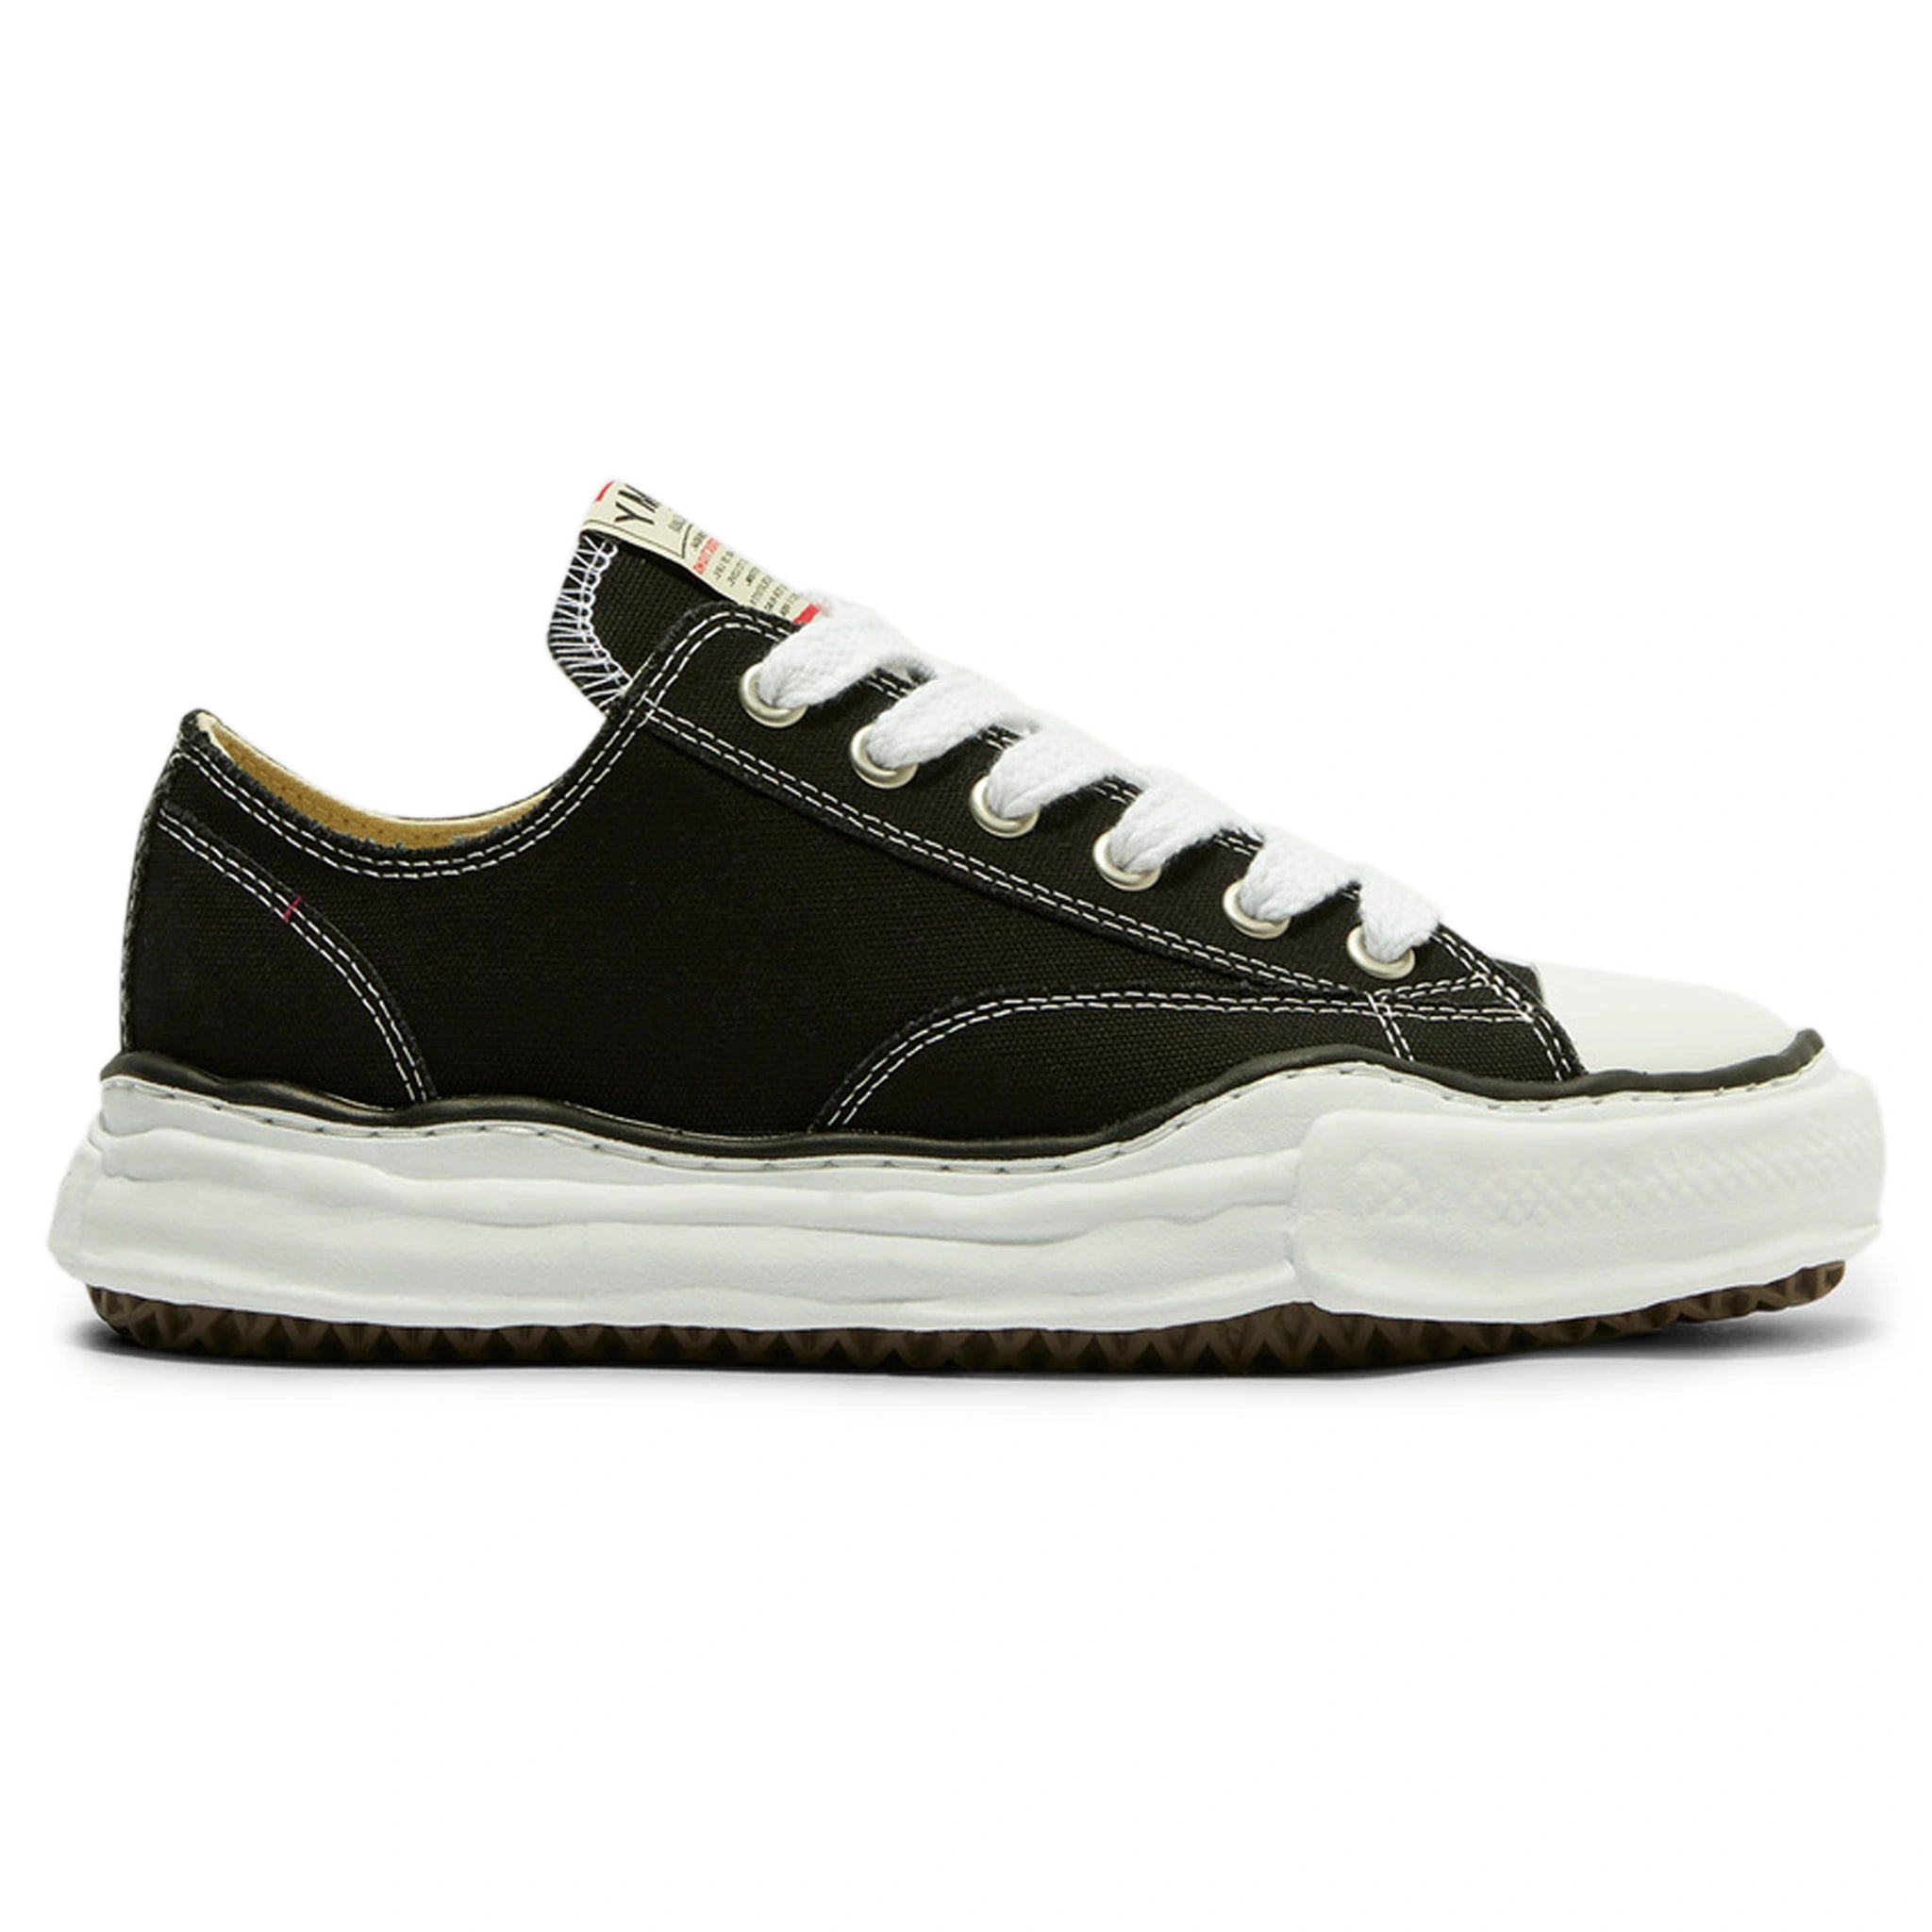 Side view of Maison Mihara Yasuhiro Peterson Original Sole Low Canvas Sneaker A01FW702